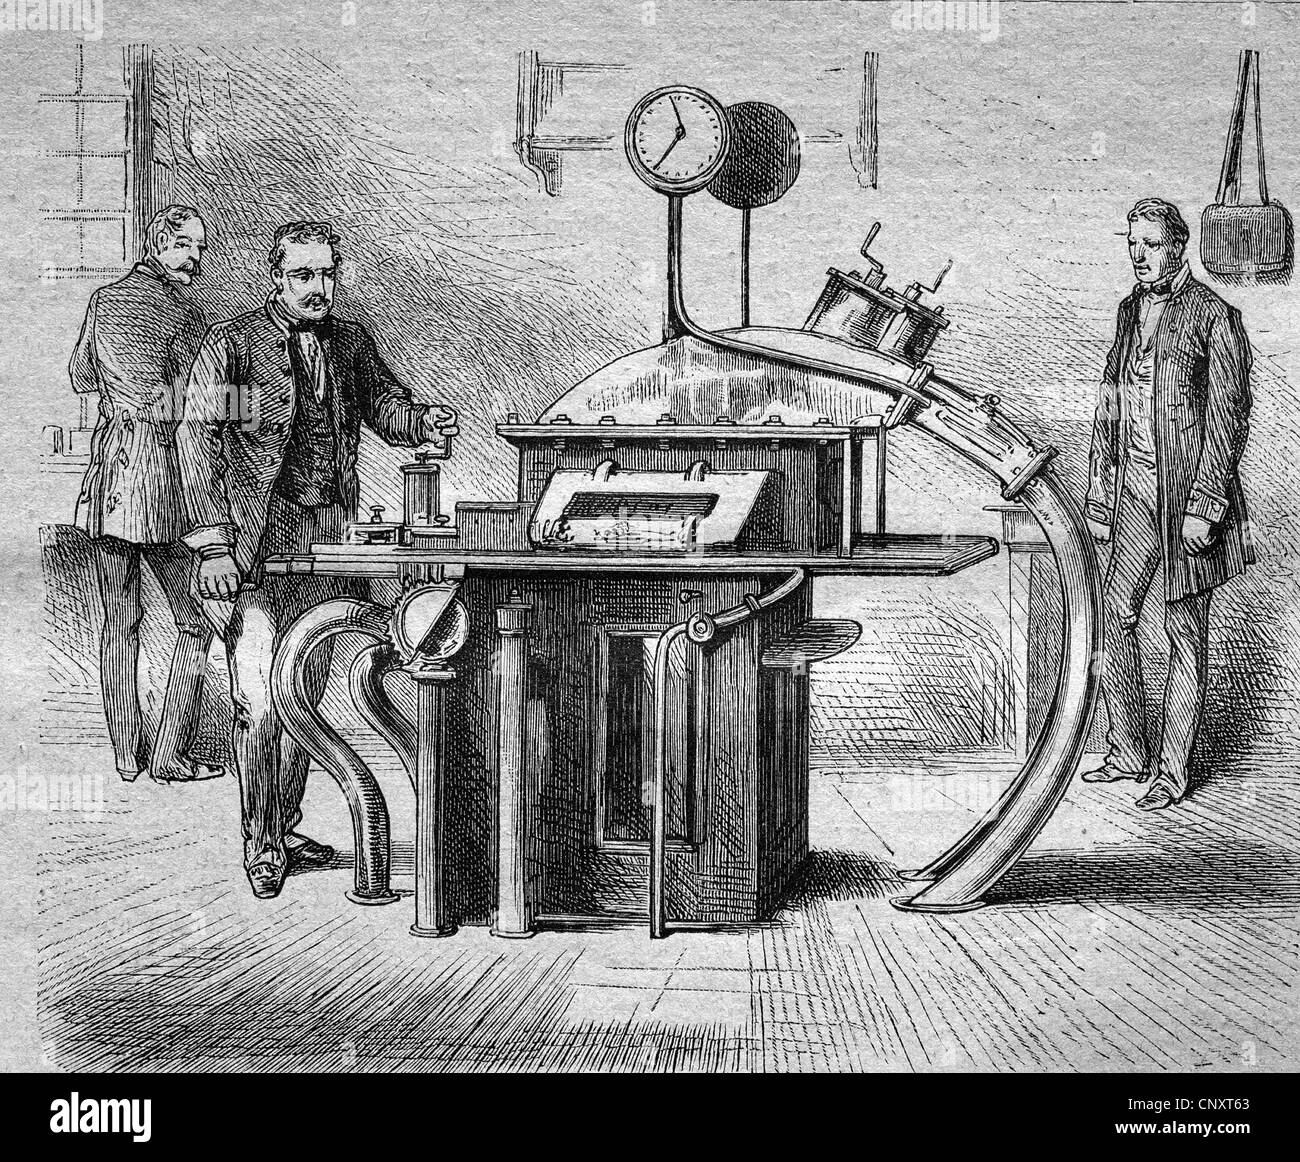 Pneumatic delivery of post in Berlin, Germany, historical engraving, 1888 Stock Photo